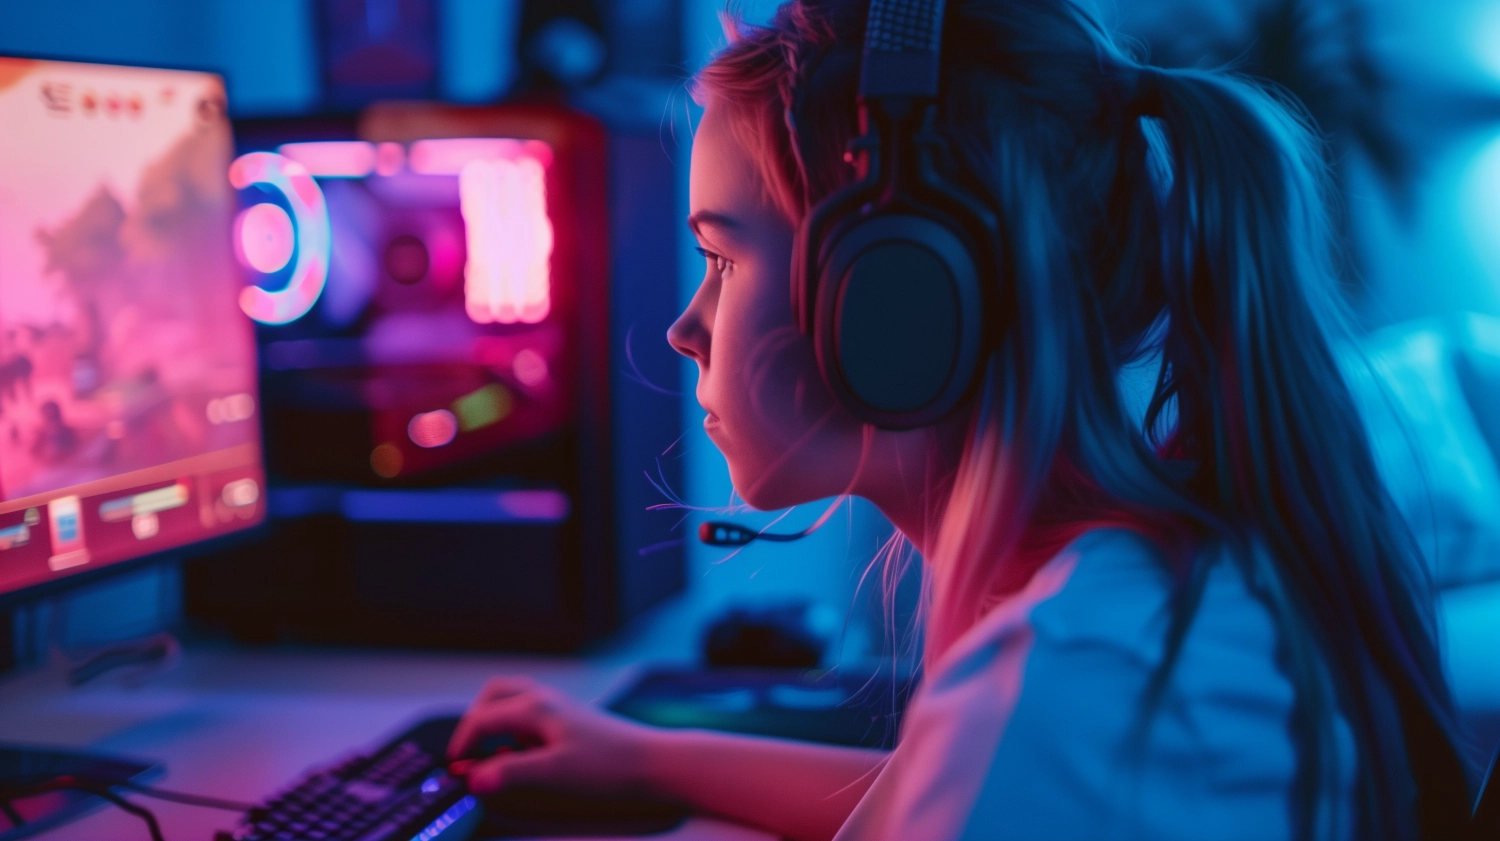 teen gamer girl playing a PC game. pink and blue tint. stock photo quality.